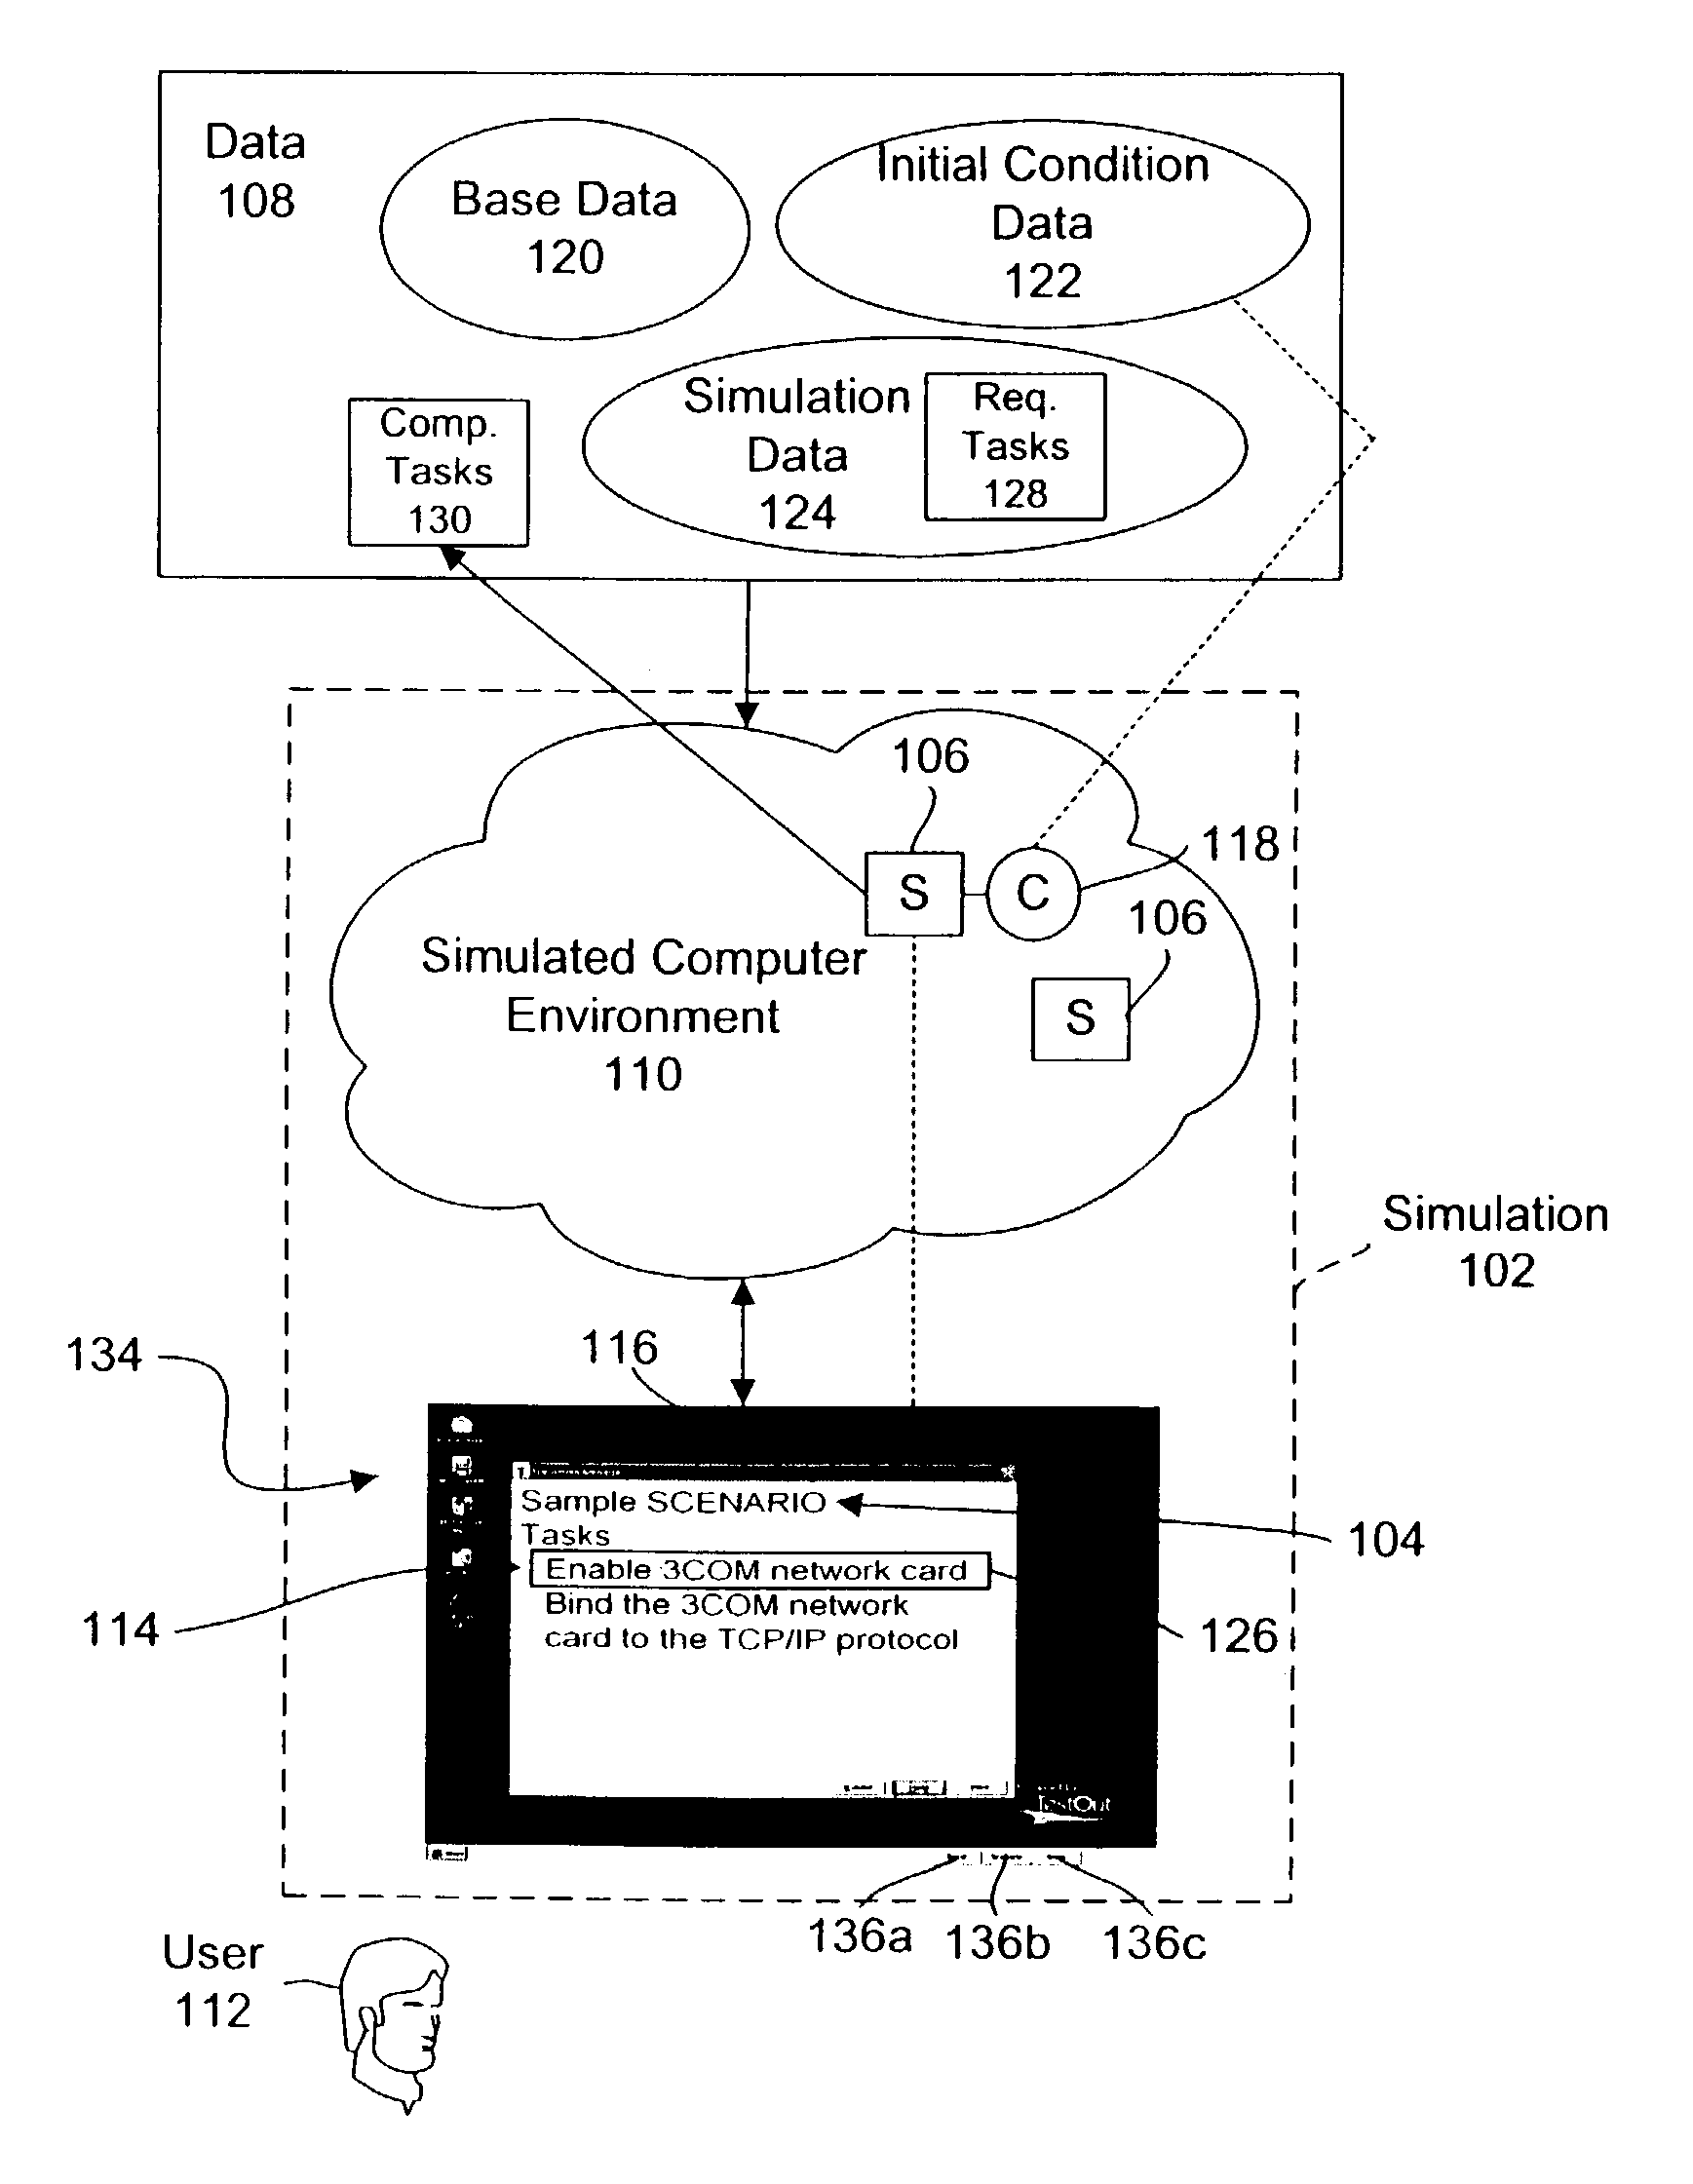 System and method for simulating a computer environment and evaluating a user's performance within a simulation